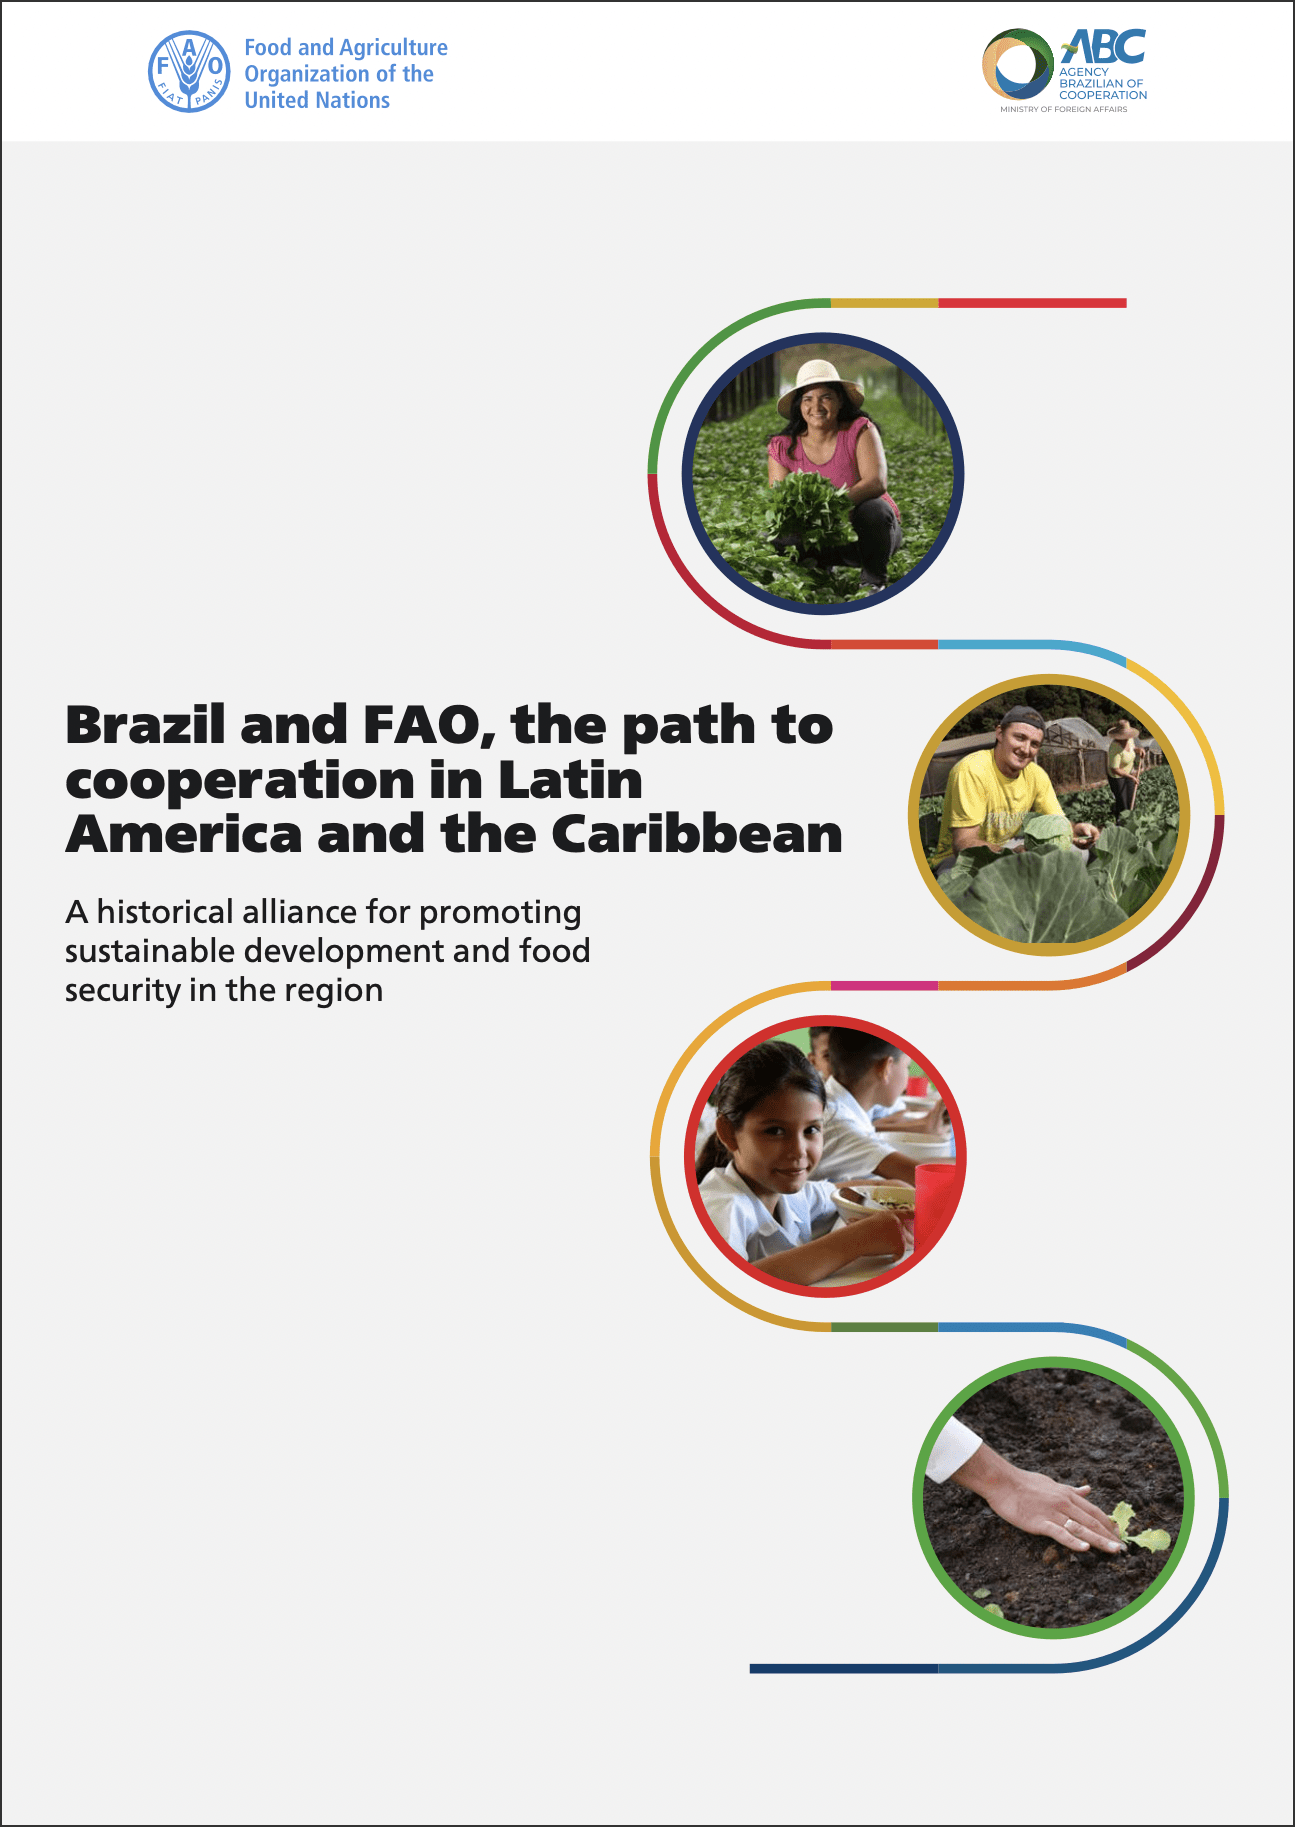 Brazil and FAO – The Path to Cooperation in Latin America and the Caribbean